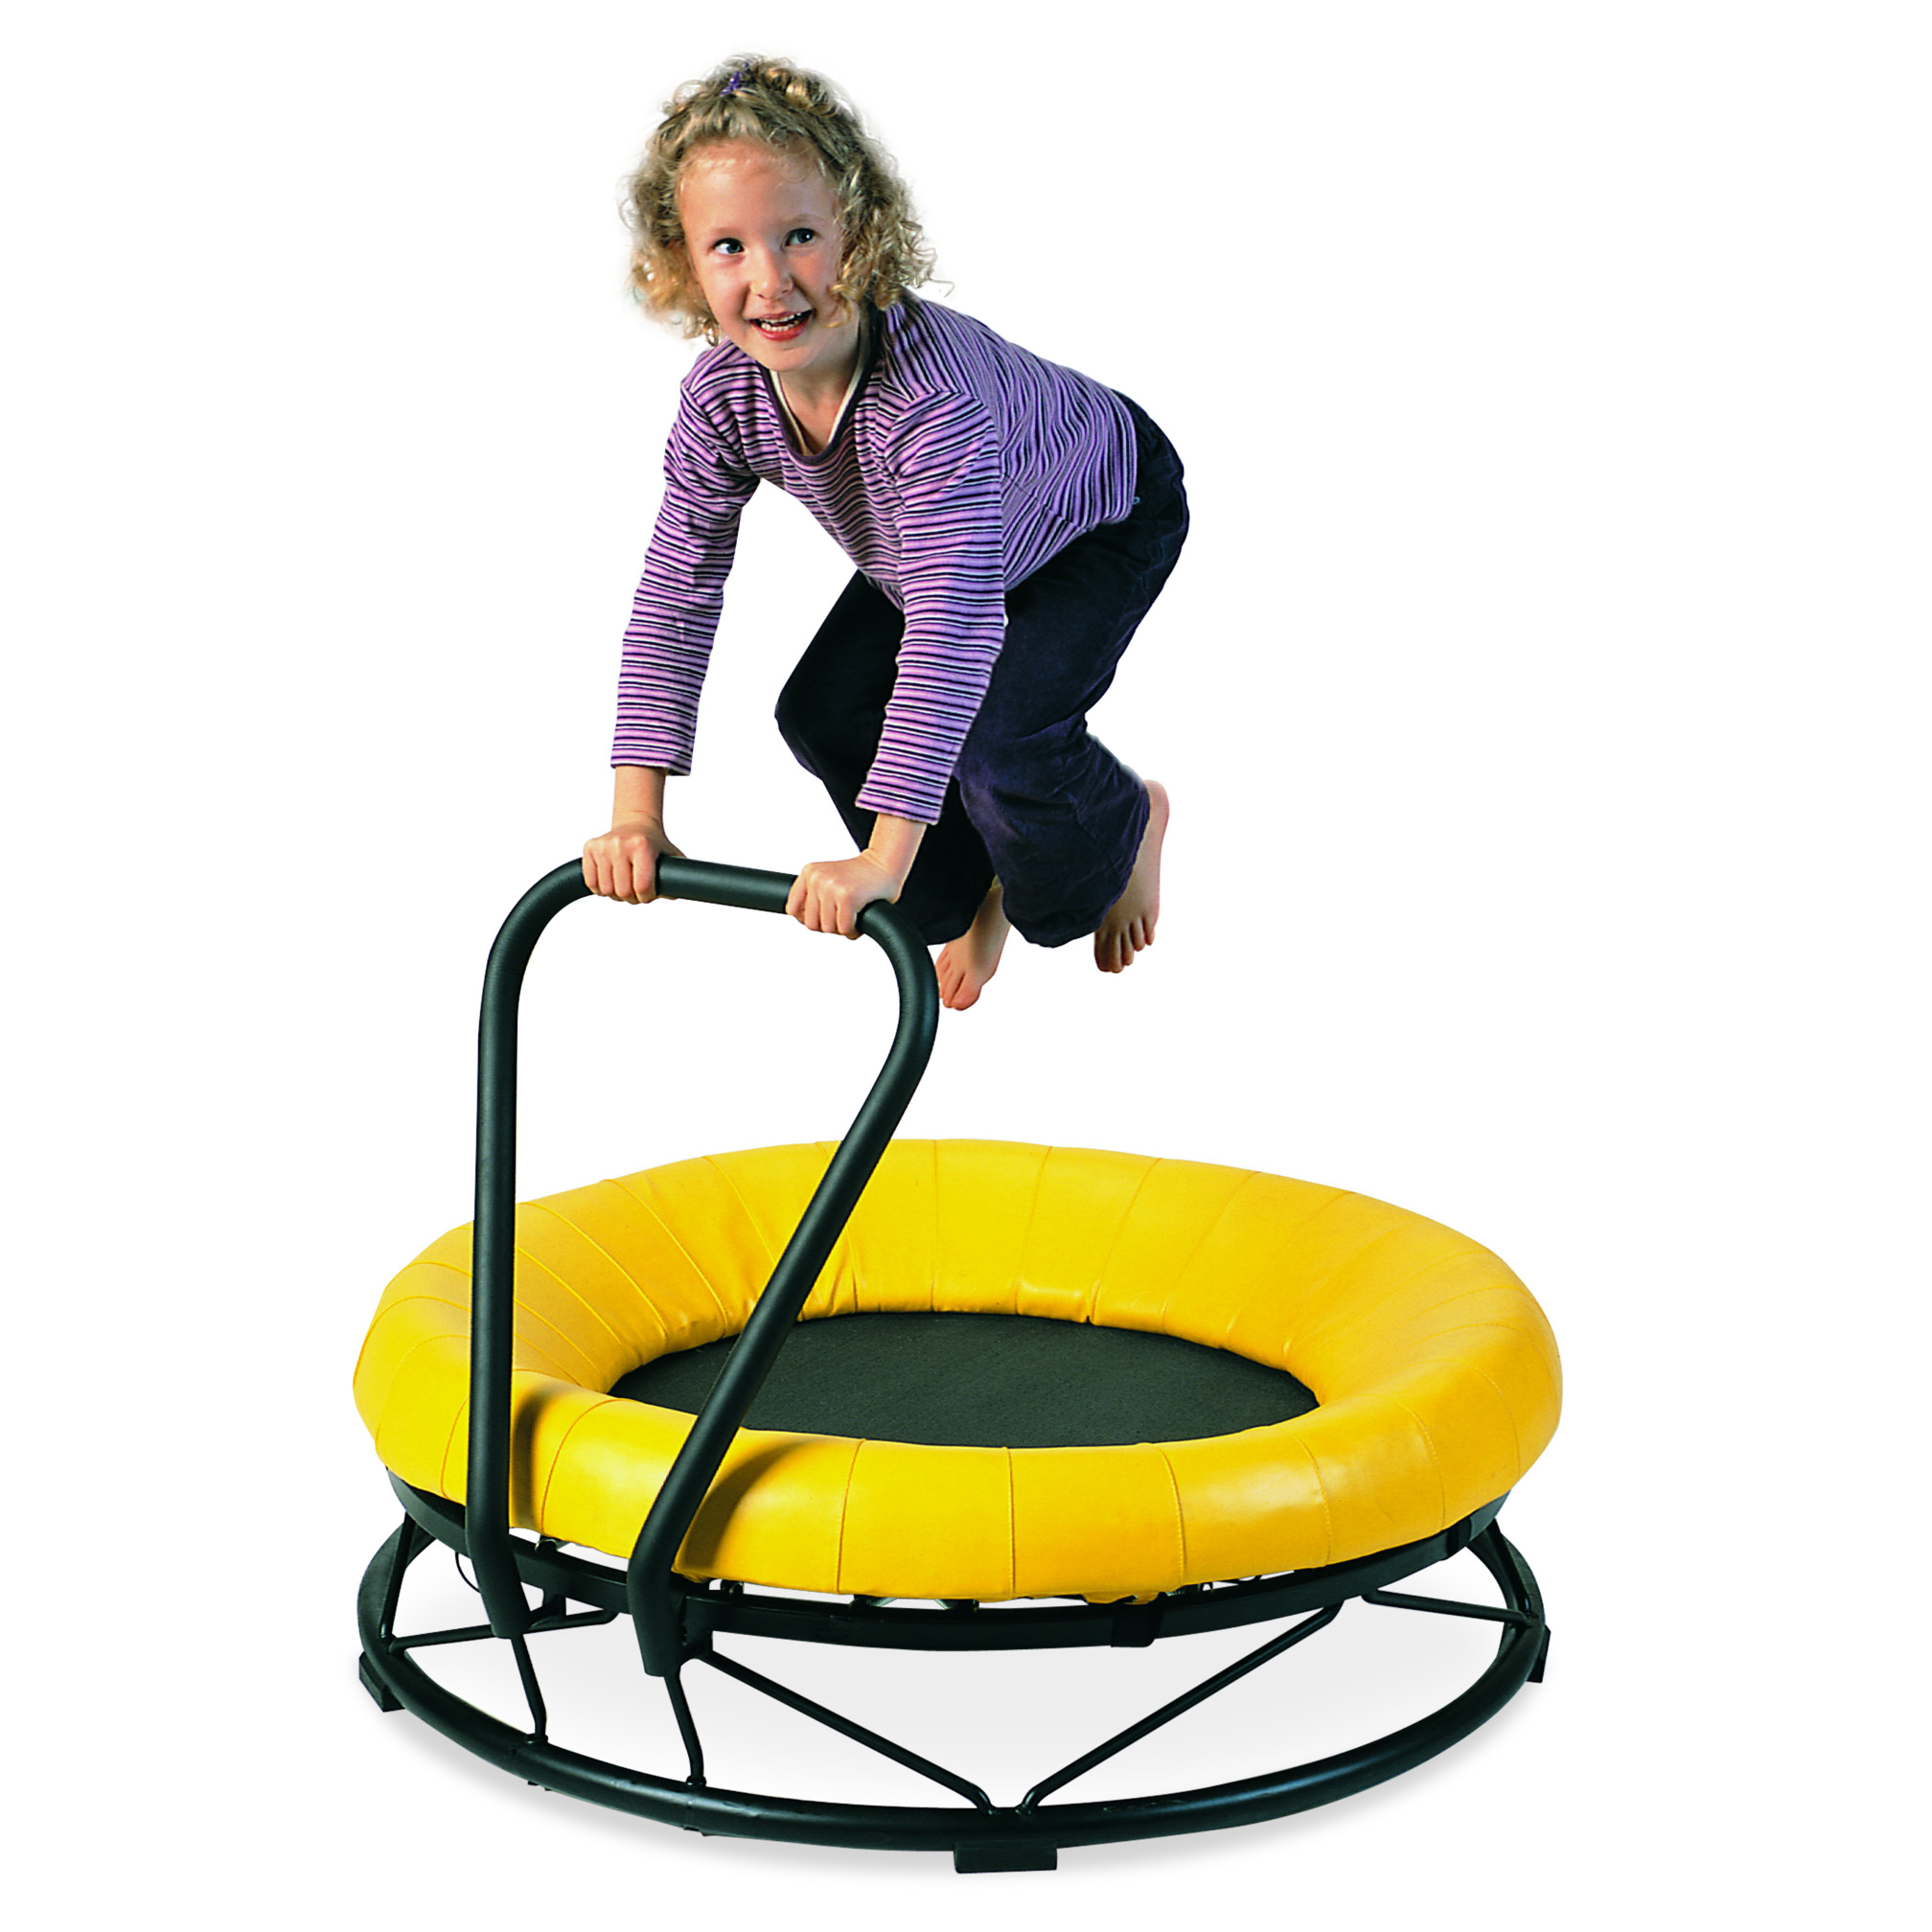 Trampoline for the youngest